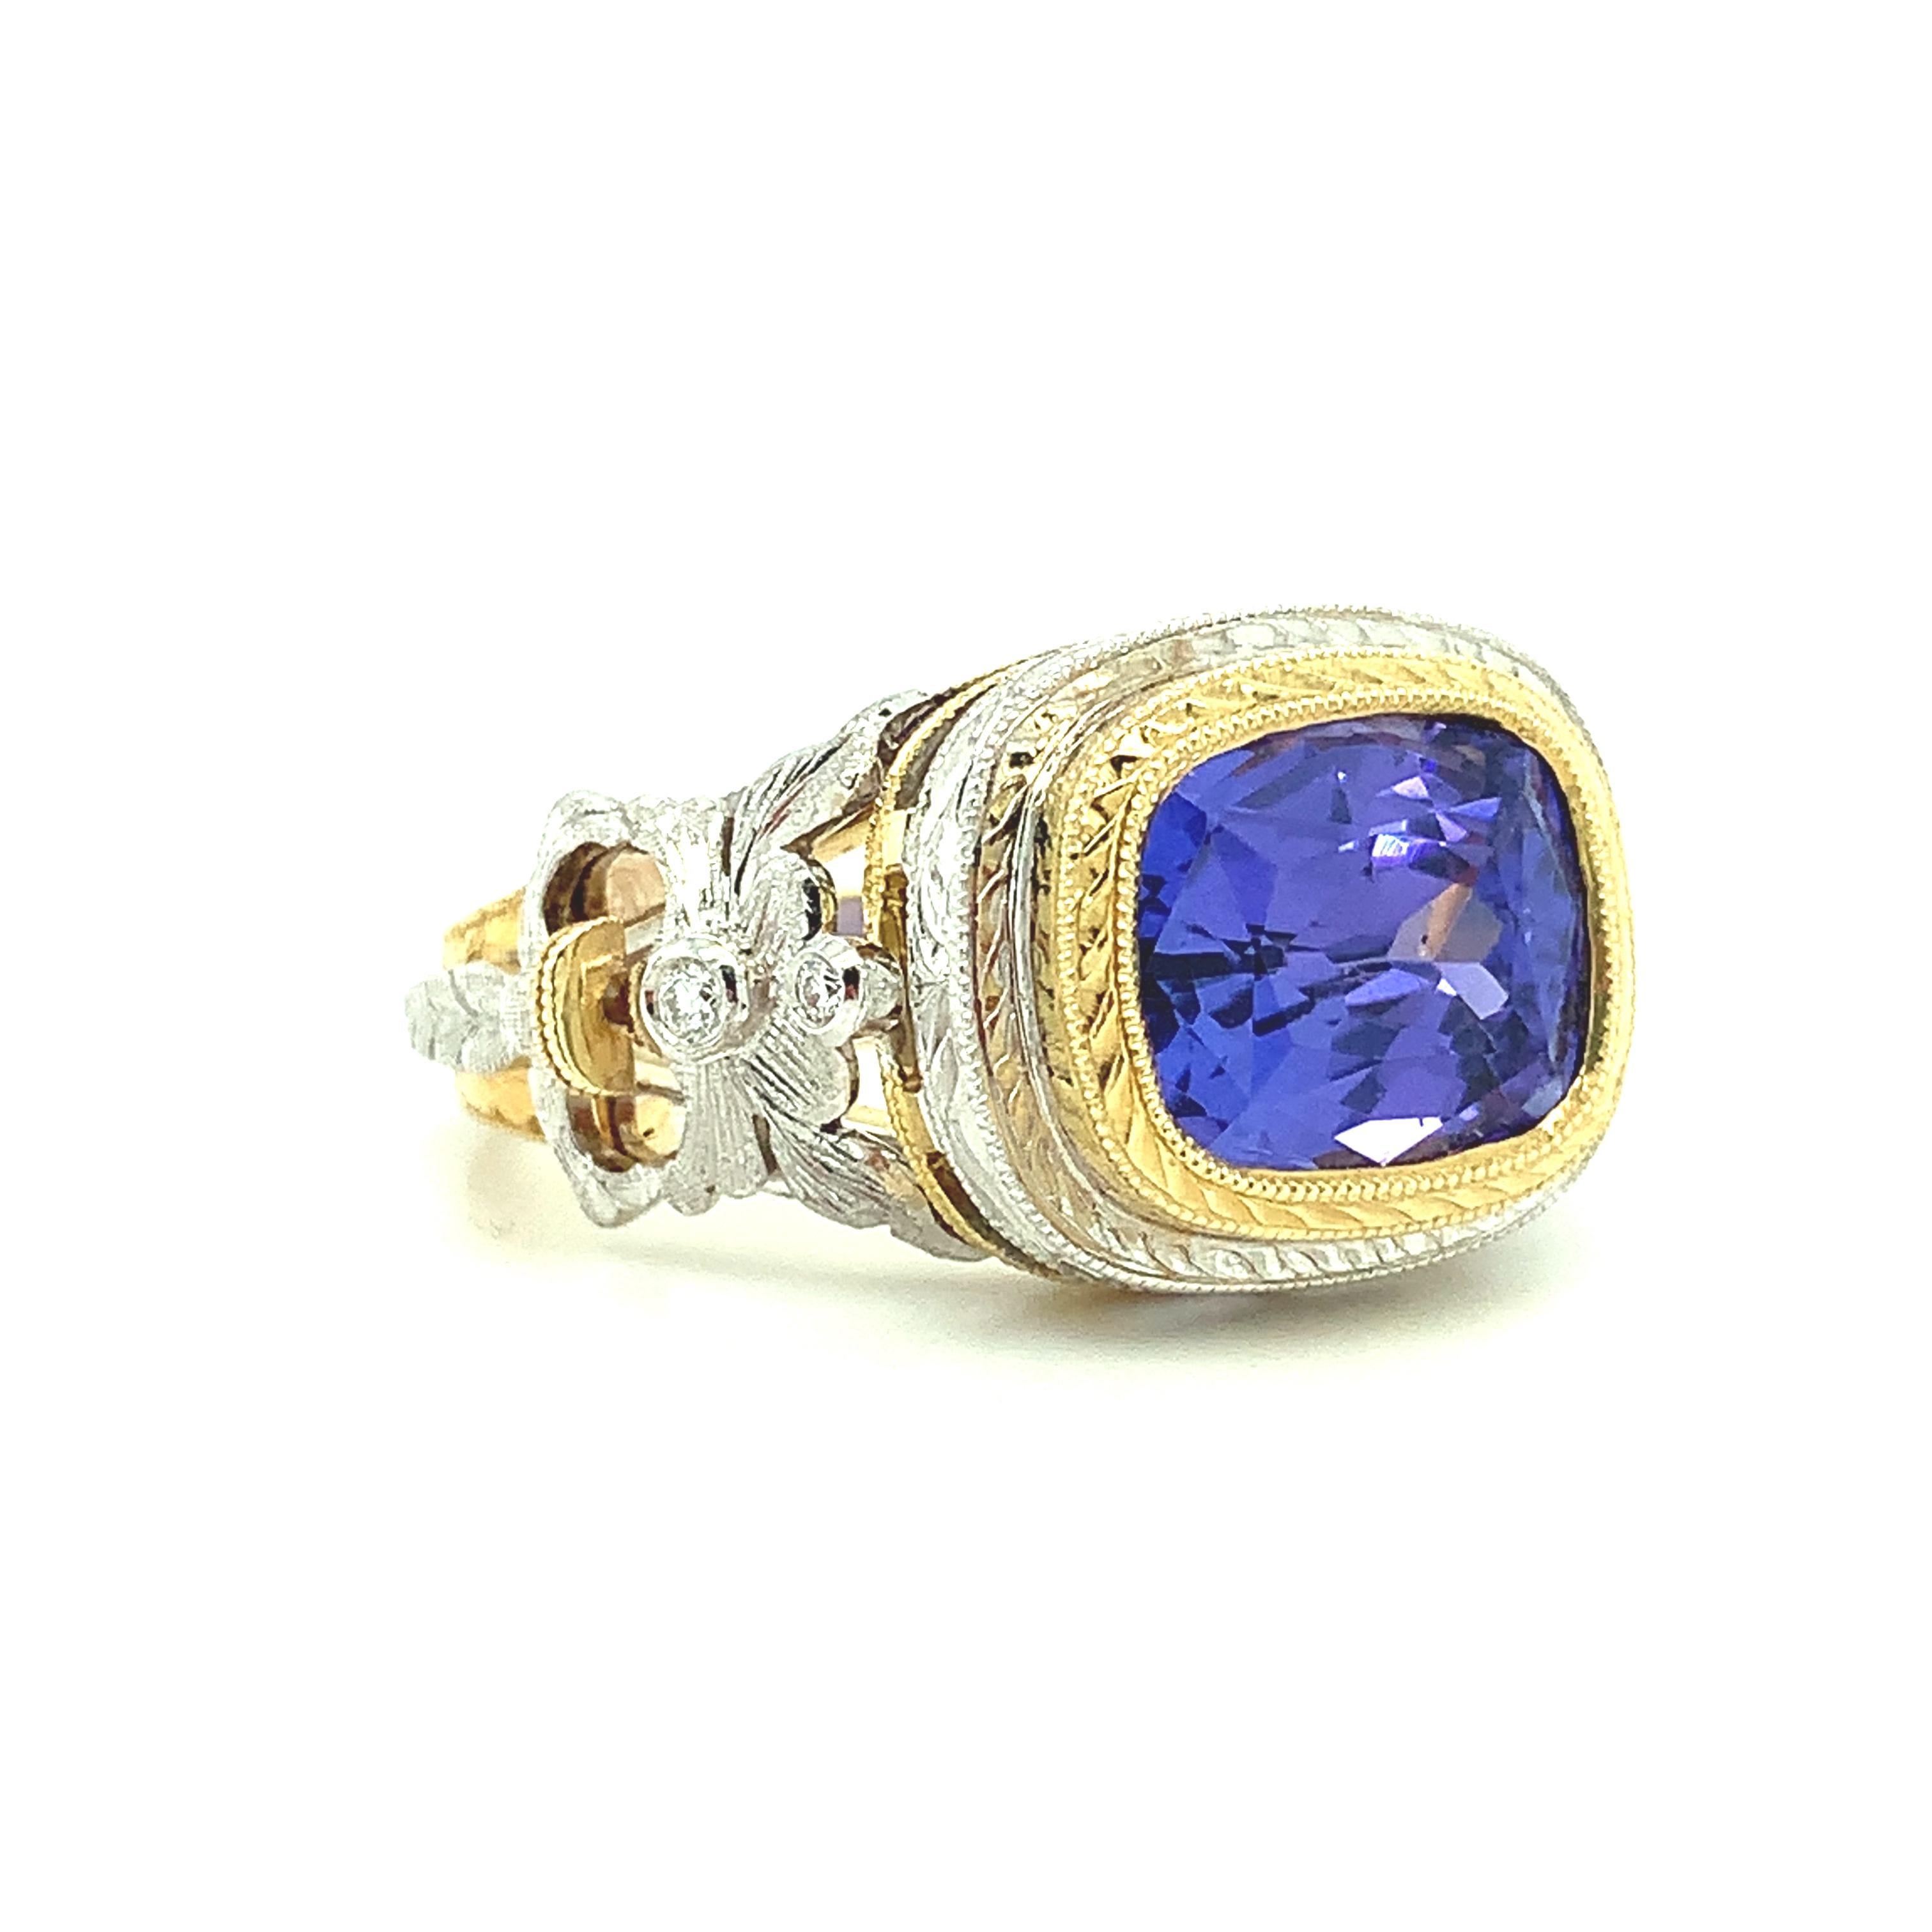 4.04 Carat Tanzanite and Diamond Cocktail Ring, Handmade in 18k Gold For Sale 2